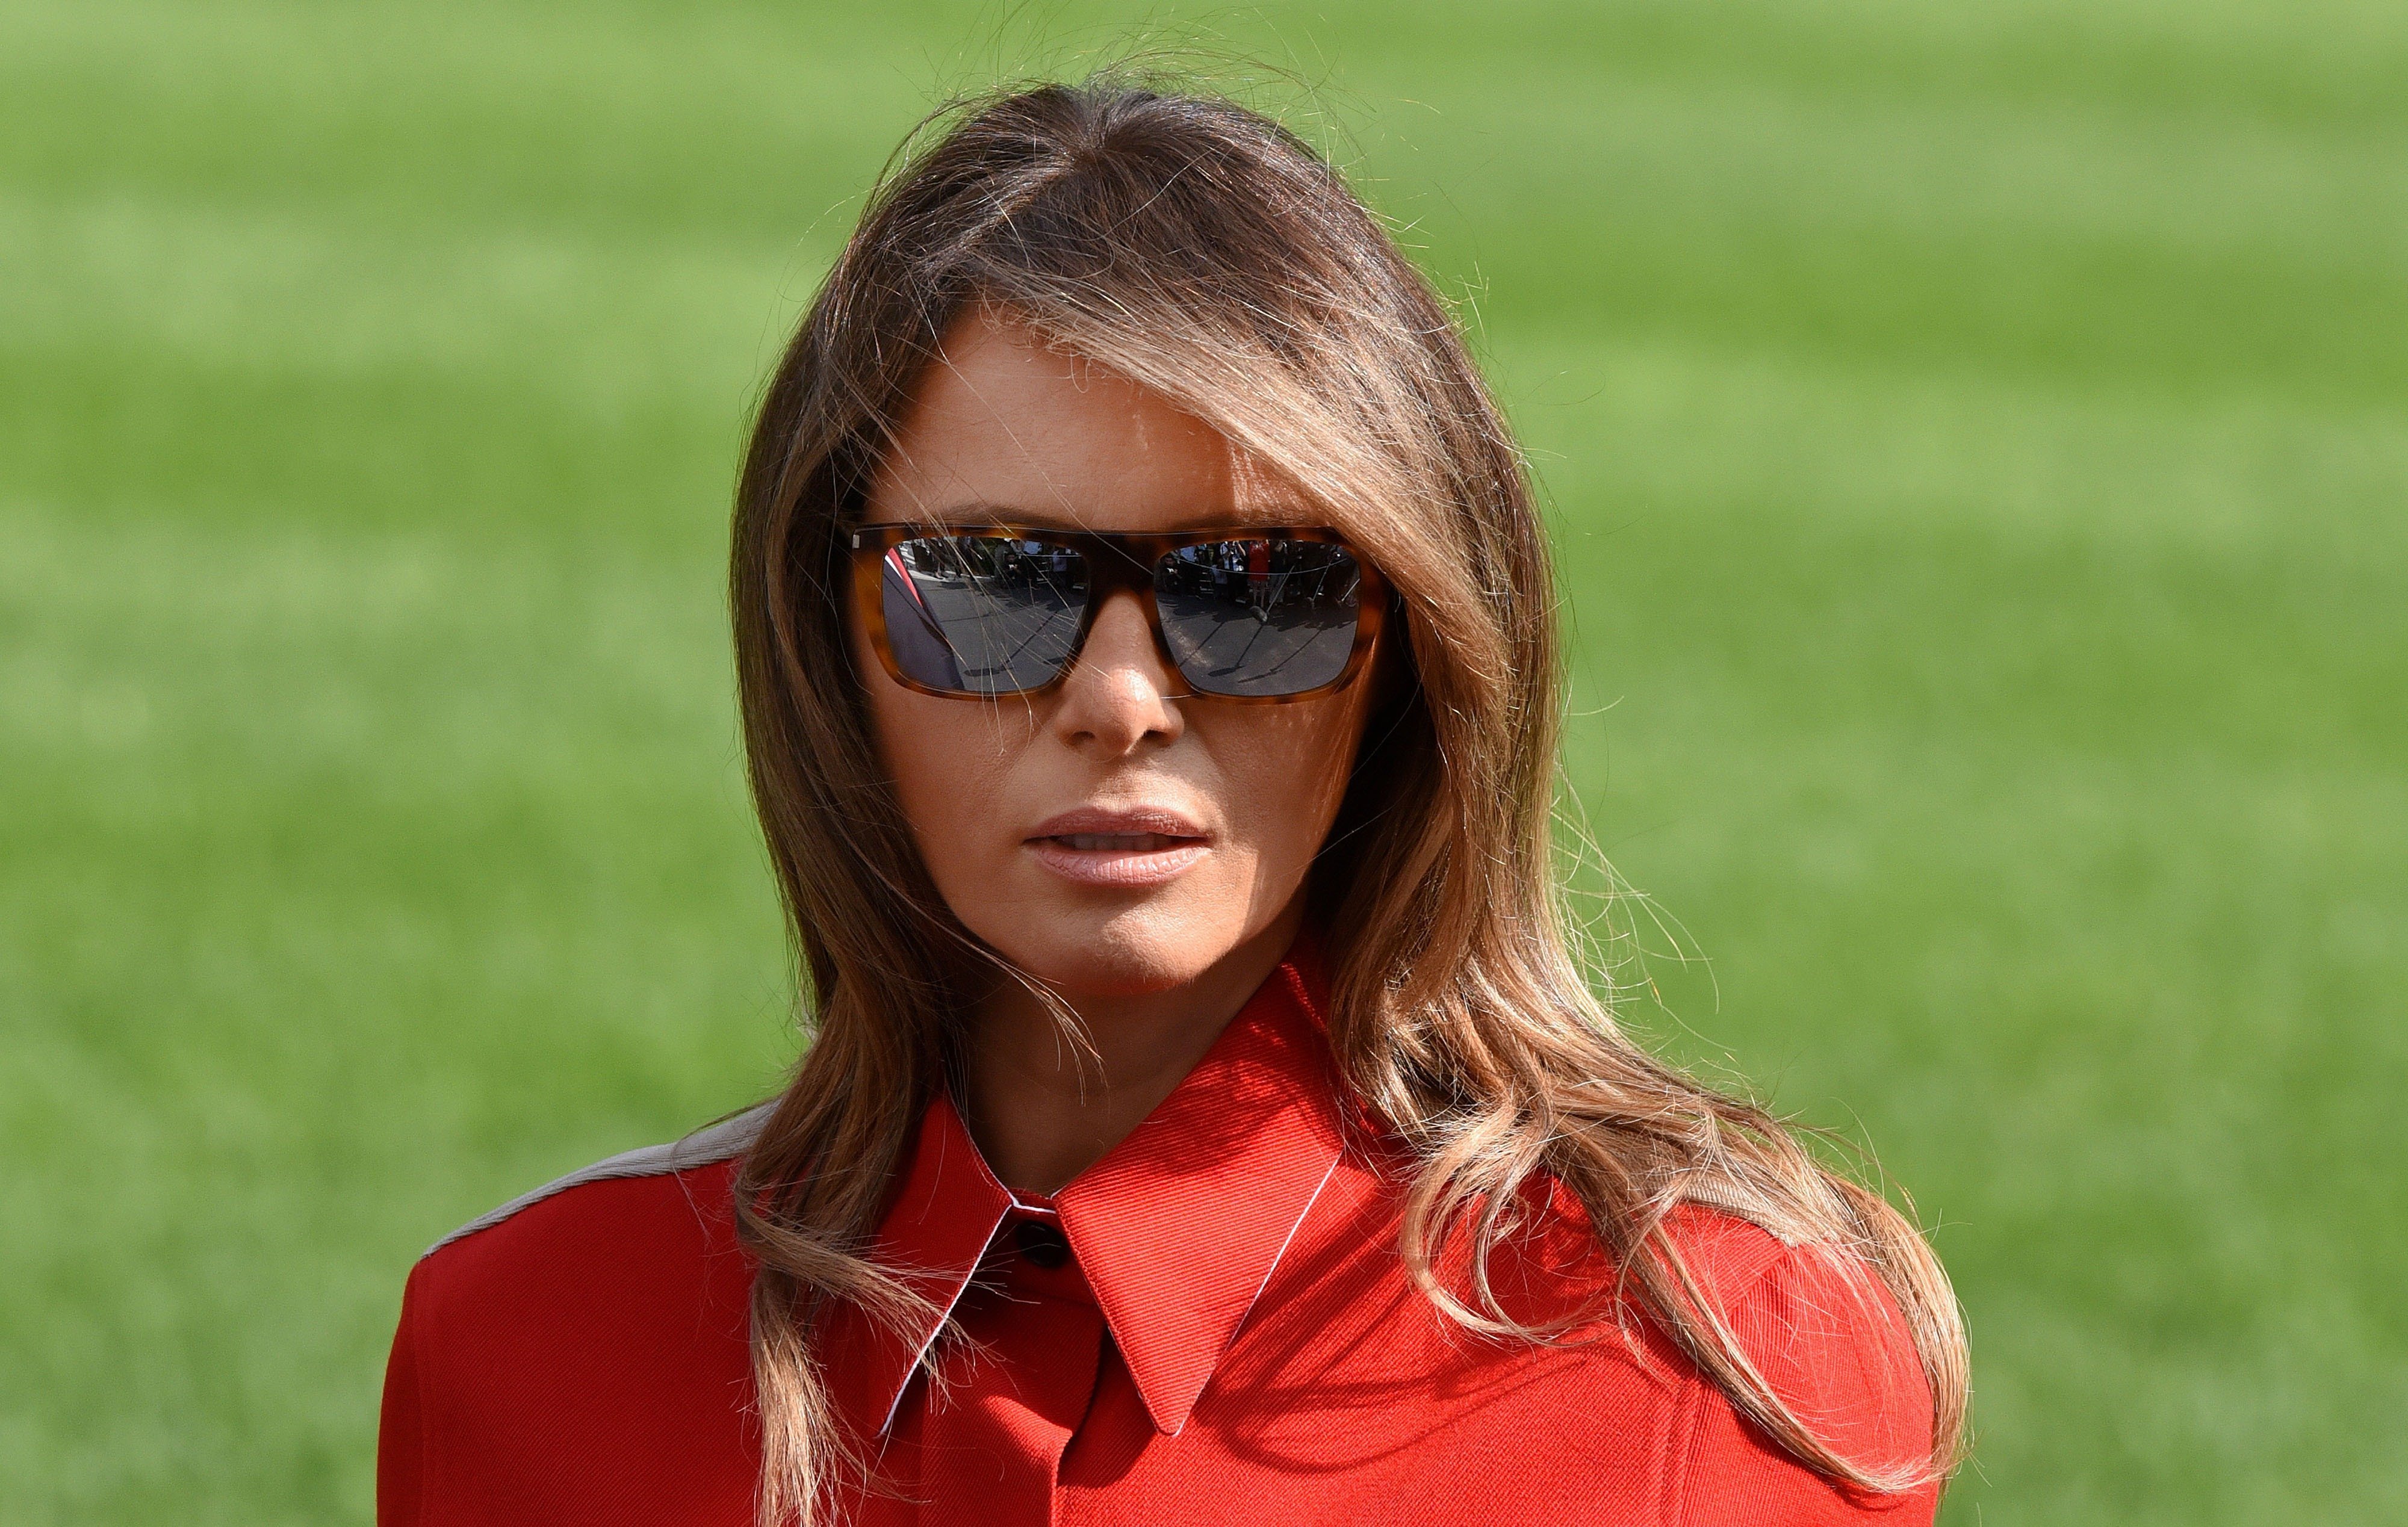 First Lady Melania Trump on the South Lawn of the White House September 10, 2017 in Washington, DC | Photo: Getty Images